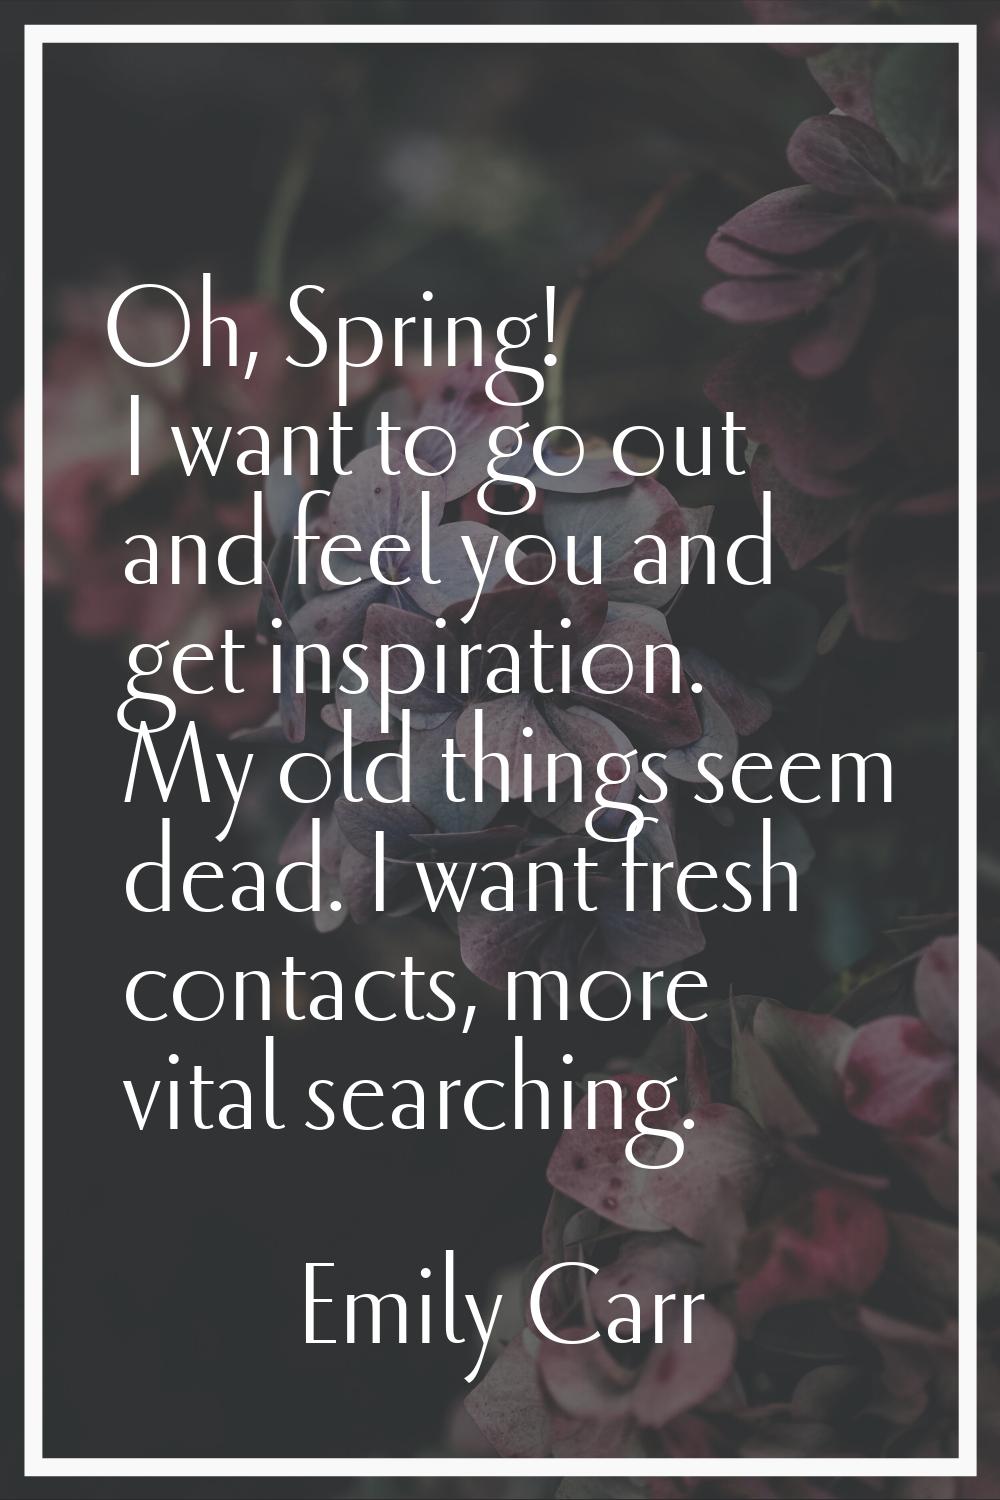 Oh, Spring! I want to go out and feel you and get inspiration. My old things seem dead. I want fres